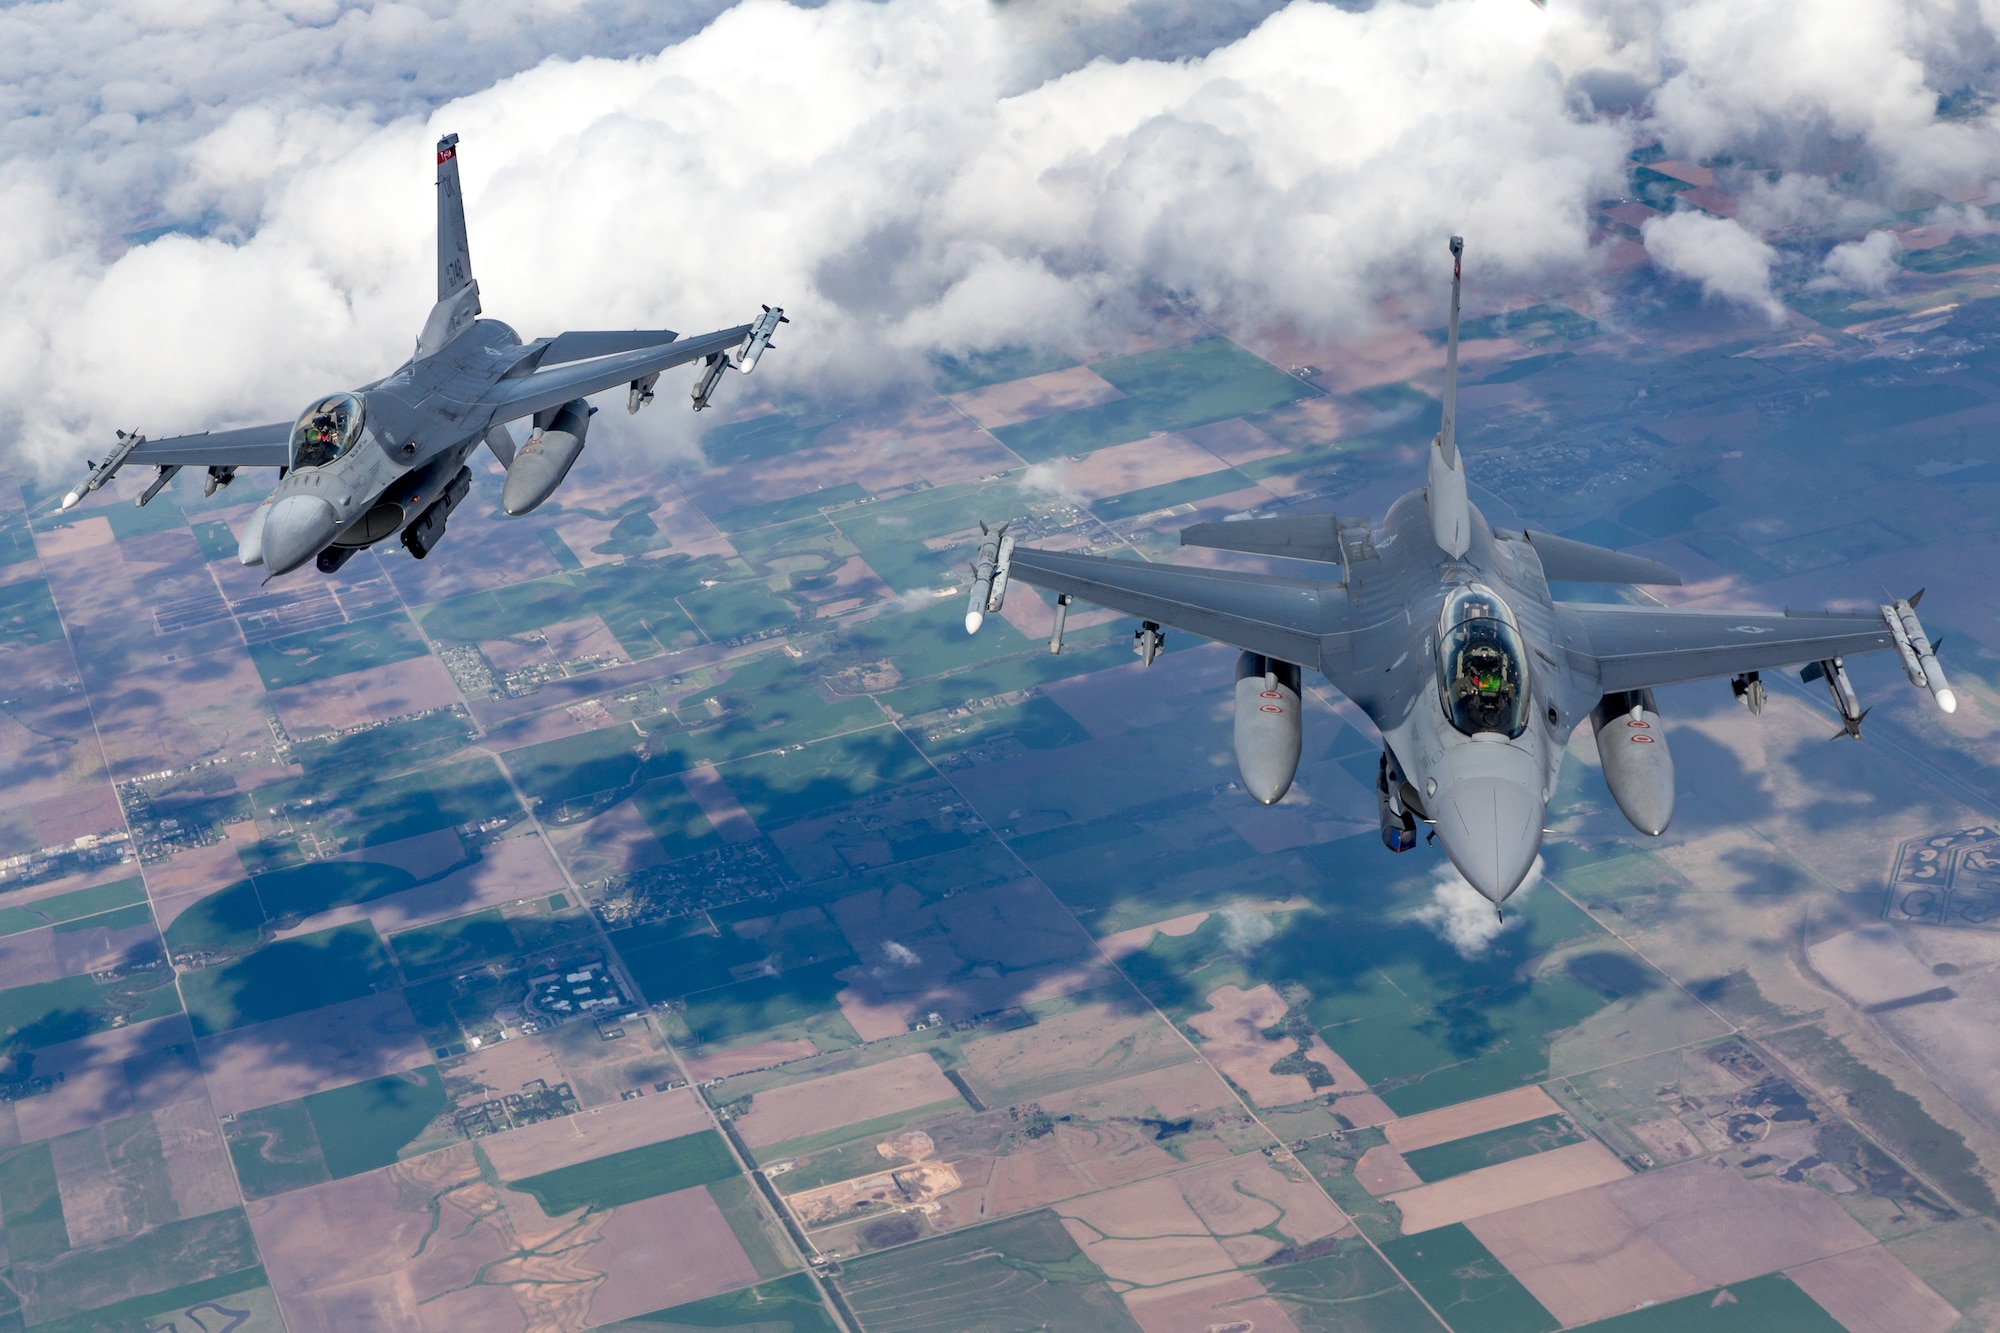 Two 138th Fighter Wing F-16 Fighting Falcons from Tulsa Air National Guard Base, Oklahoma, fly behind a KC-135R Stratotanker April 25, 2019. The Stratotanker, from the 507th Air Refueling Wing at Tinker Air Force Base, Oklahoma, refueled four 138th Fighter Wing F-16 Fighting Falcons during flight operations over Kansas. (Courtesy photo by Mike Killian)